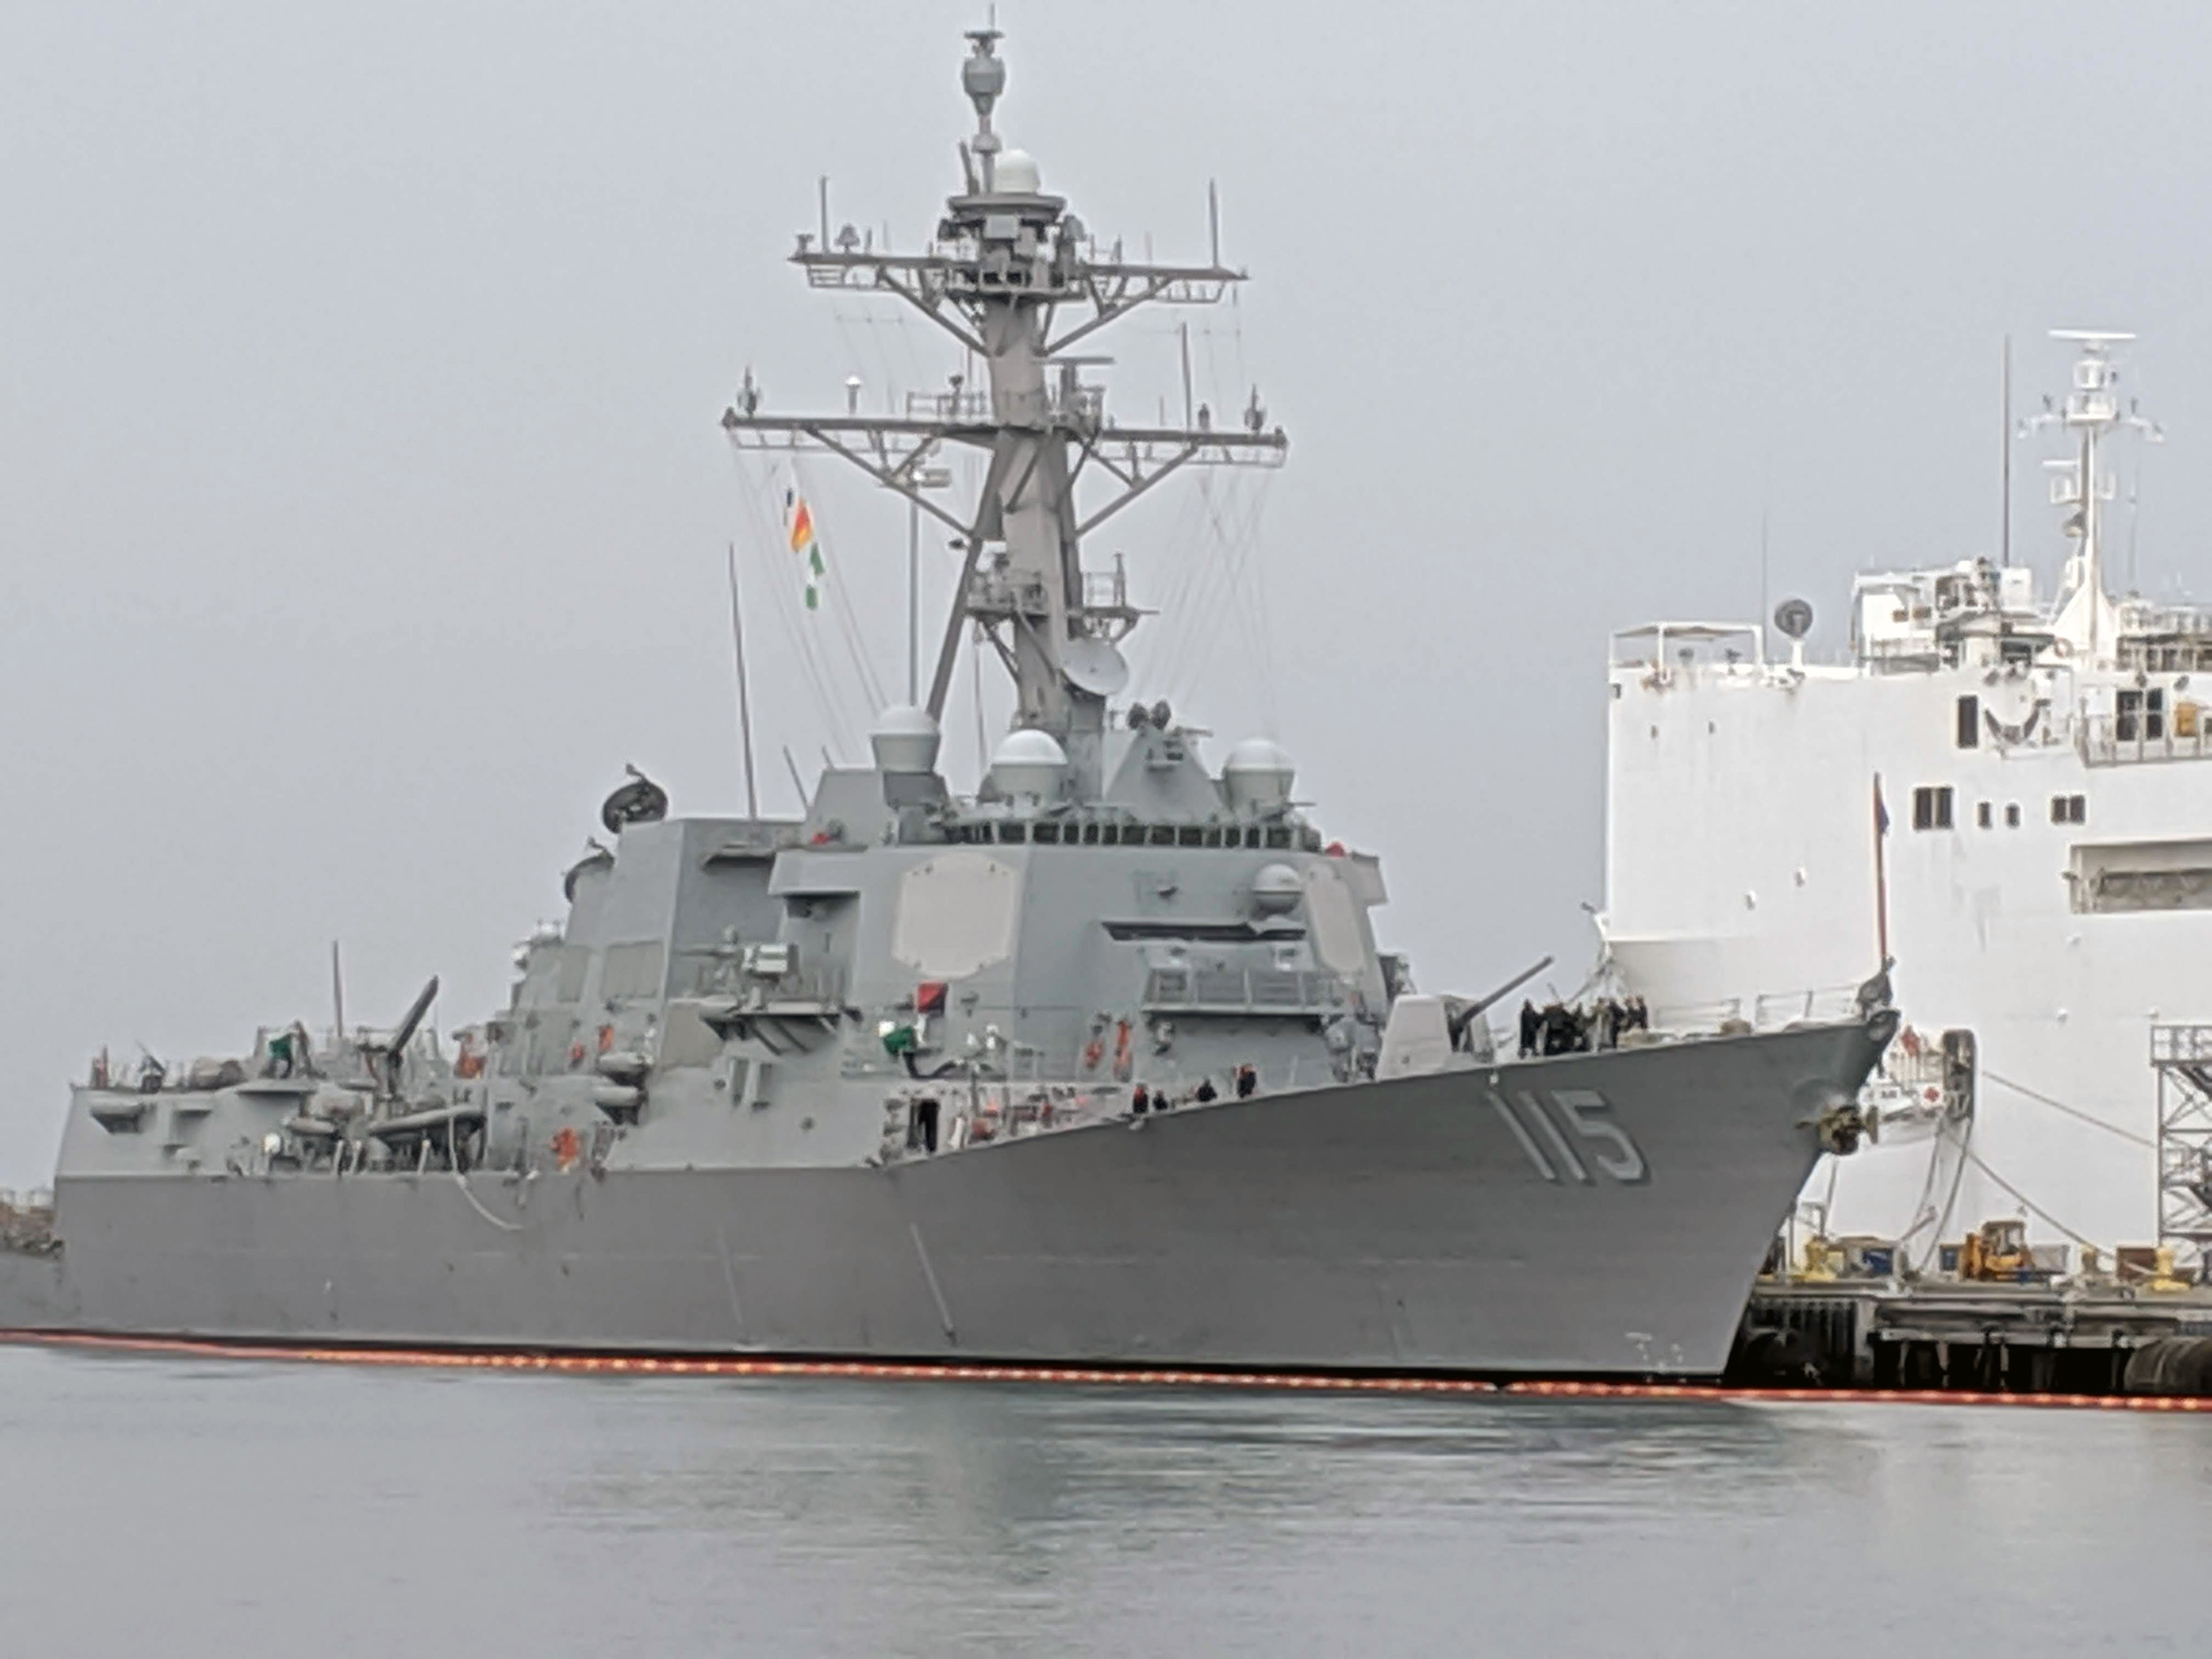 U.S.S. Rafael Peralta, a guided-missile destroyer.